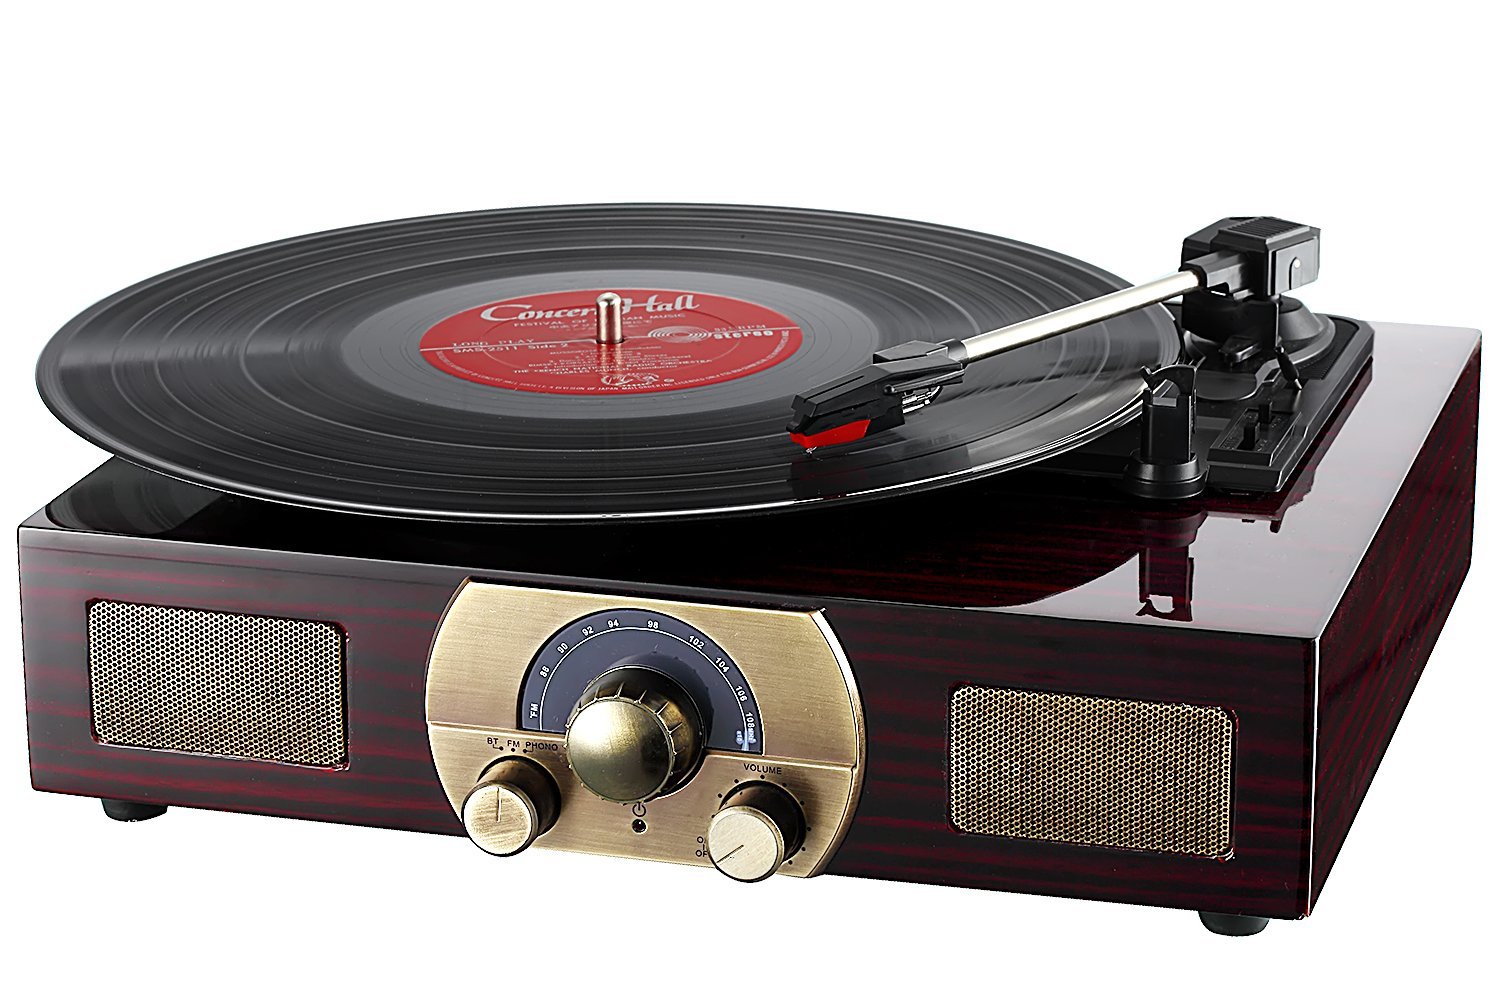 Vinyl Turntables LuguLake Stereo 3Speed Turntable with BuiltIn Bluetooth Speakers Record Player FM Radio and RCA Ou